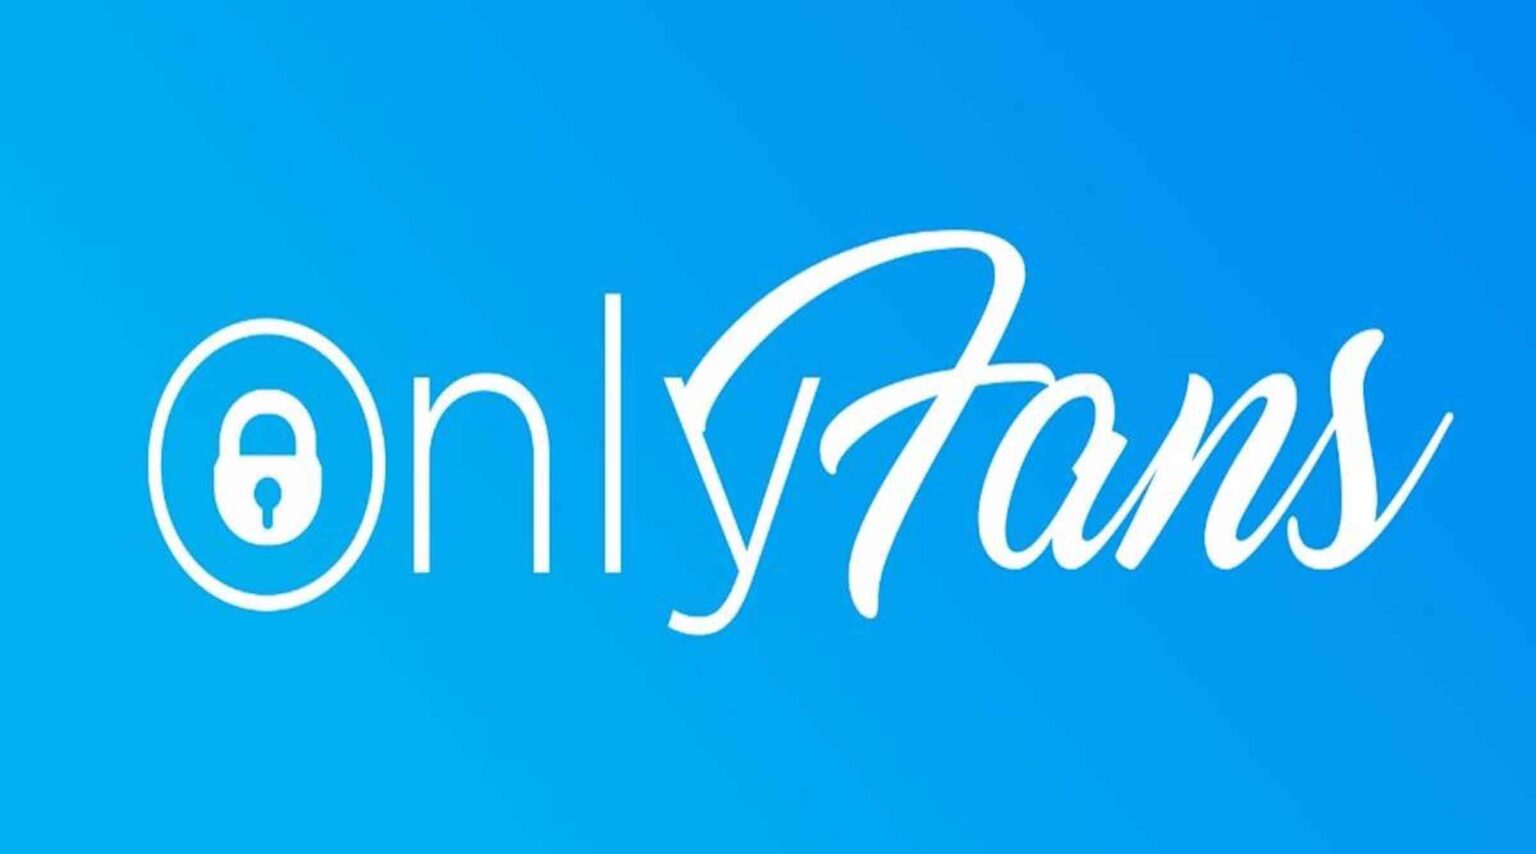 We searched through the threads to find more information and the best reactions to the recent shift for the 'OnlyFans' website. See our latest details!